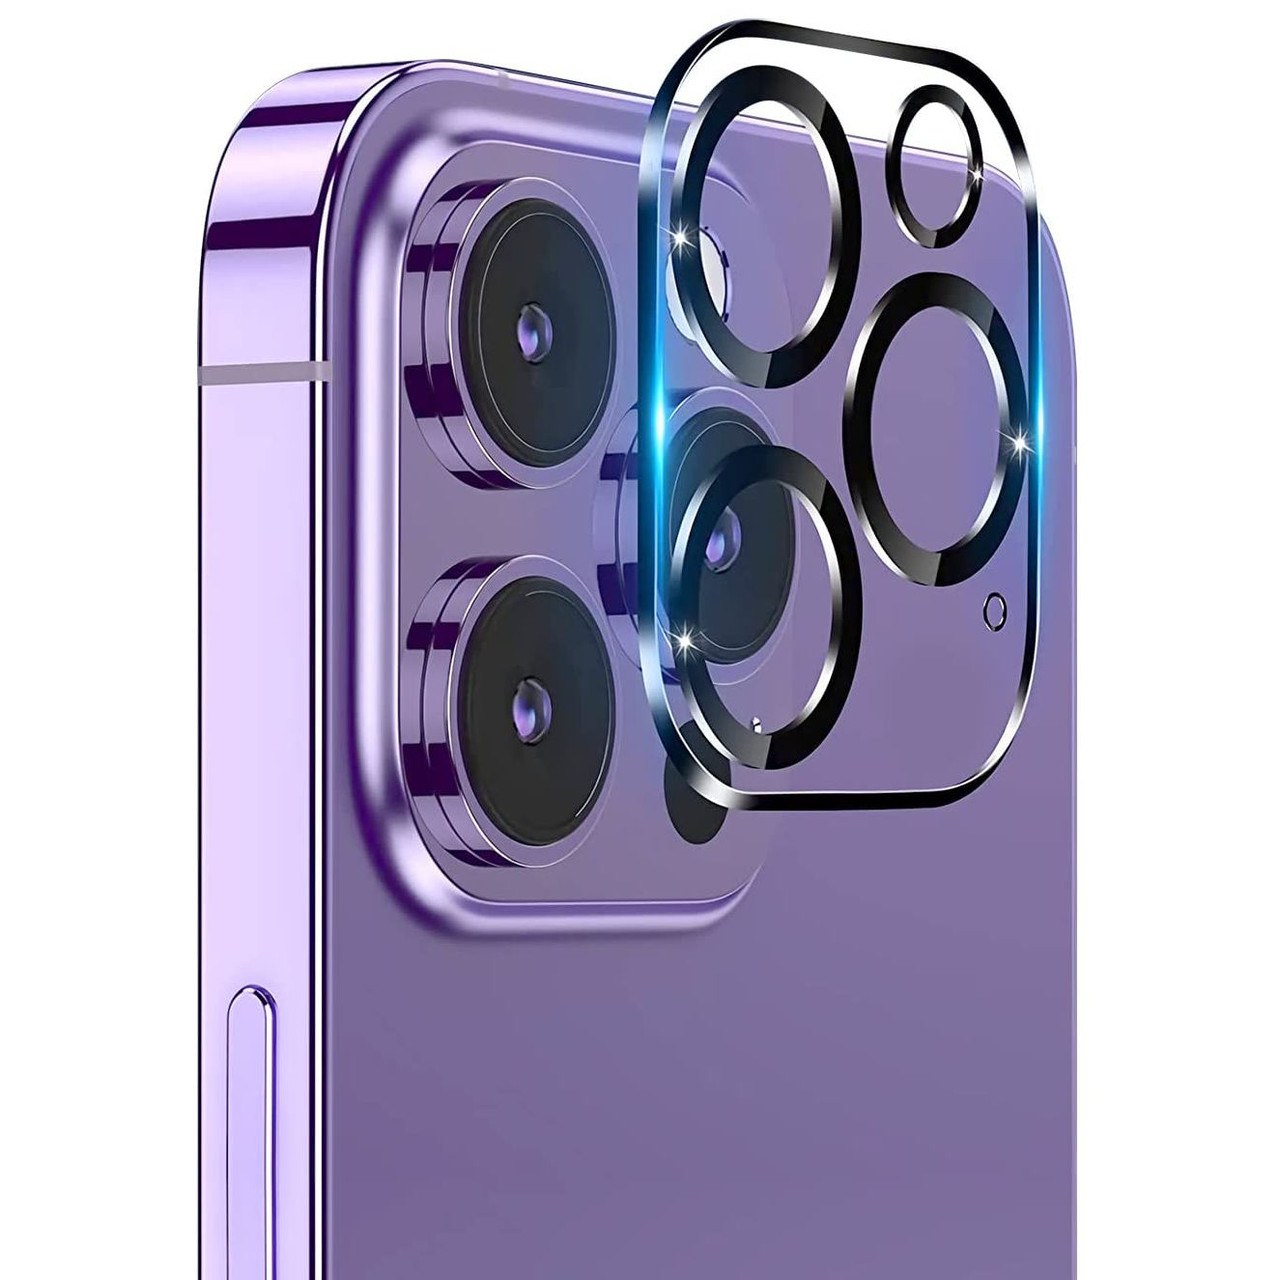 Camera Lens Protector for iPhone 14 Pro & 14 Pro Max